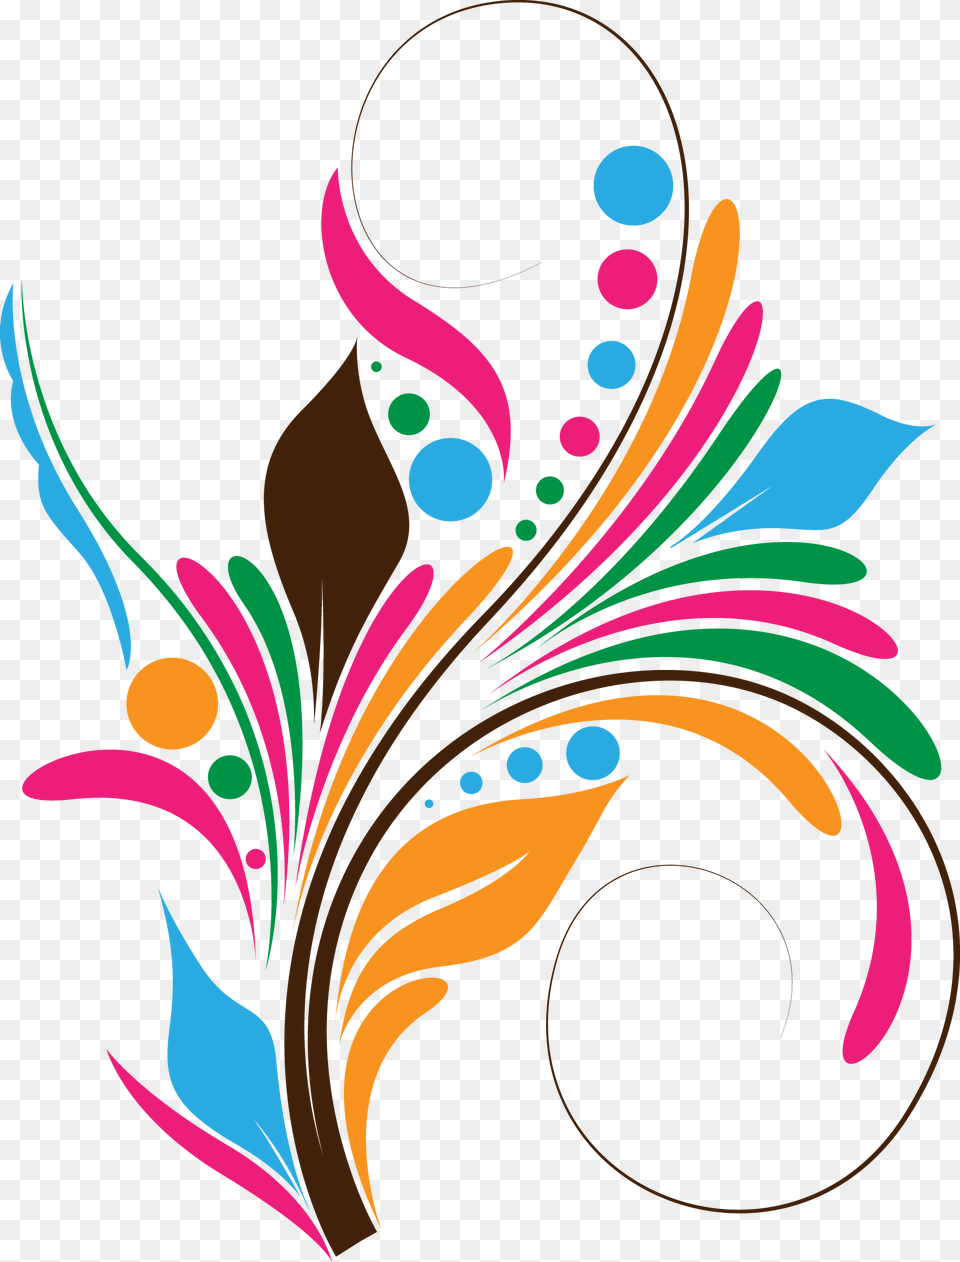 Love The Shape And Colors Corel Draw Designs, Art, Floral Design, Graphics, Pattern Free Png